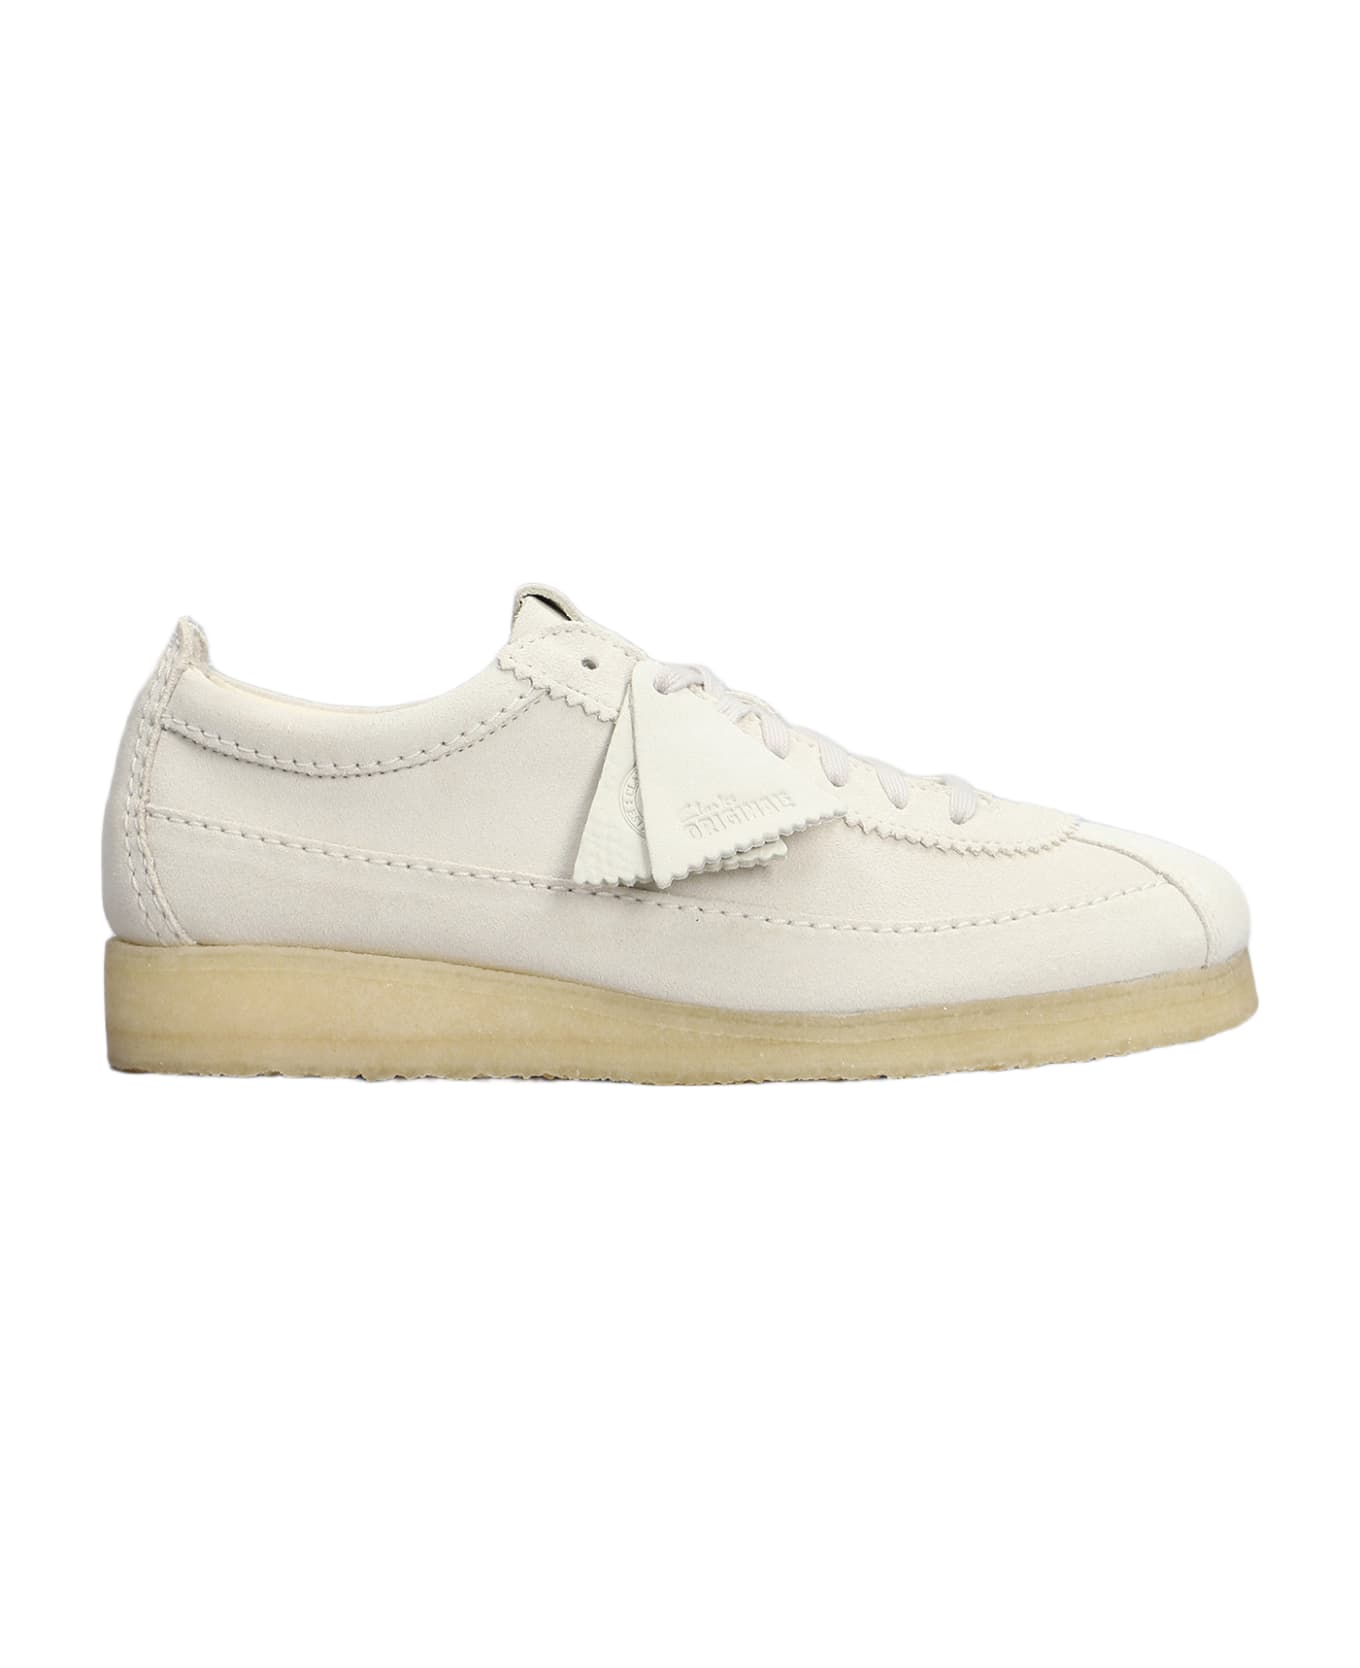 Clarks Wallabee Tor Sneakers In White Suede - white